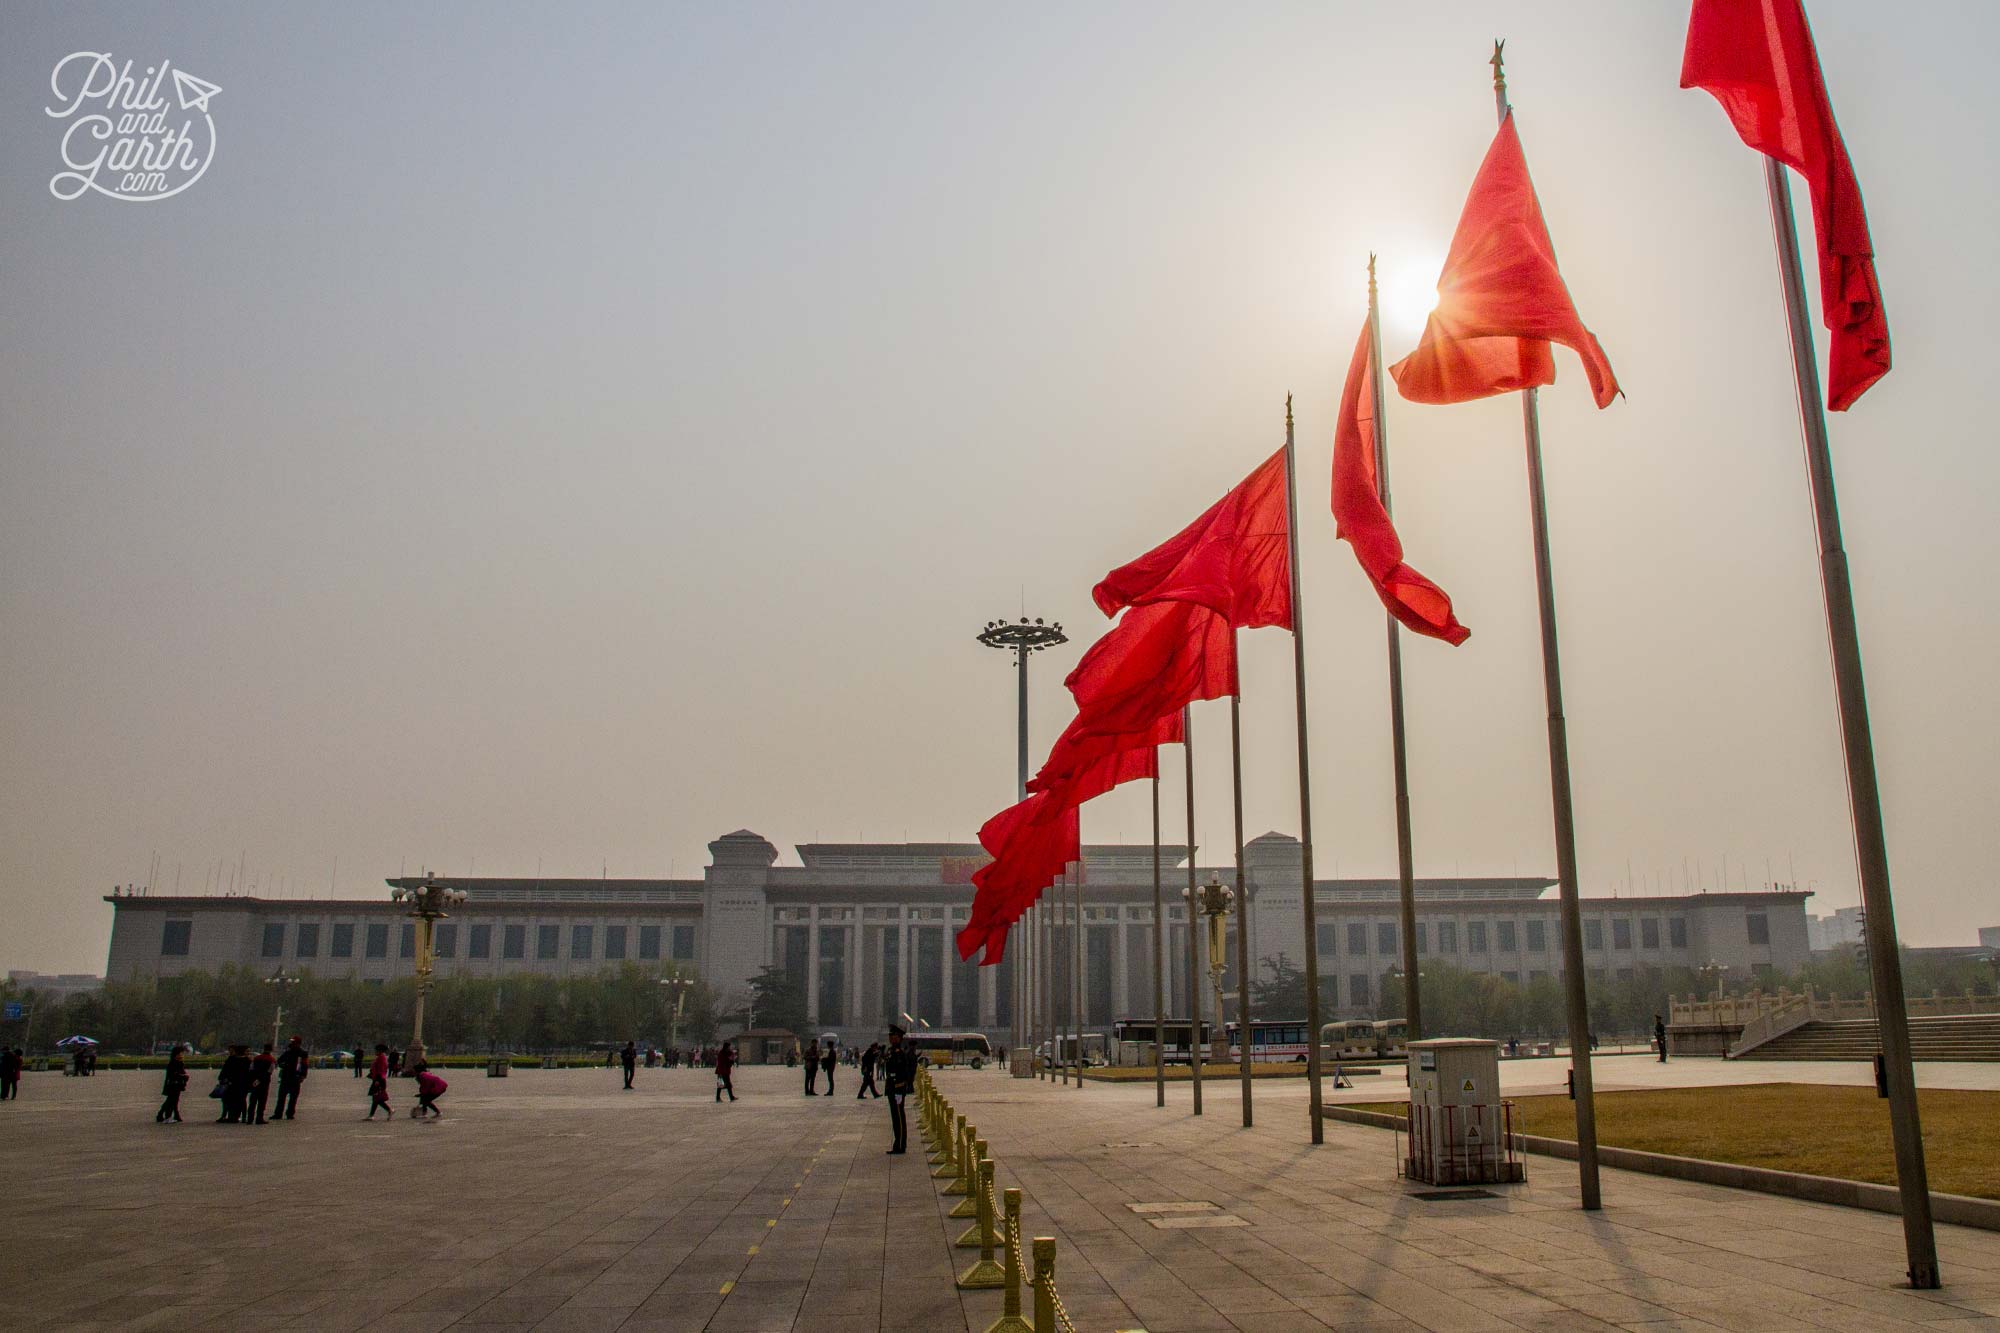 Looking towards the National Museum of China on Tiananmen Square